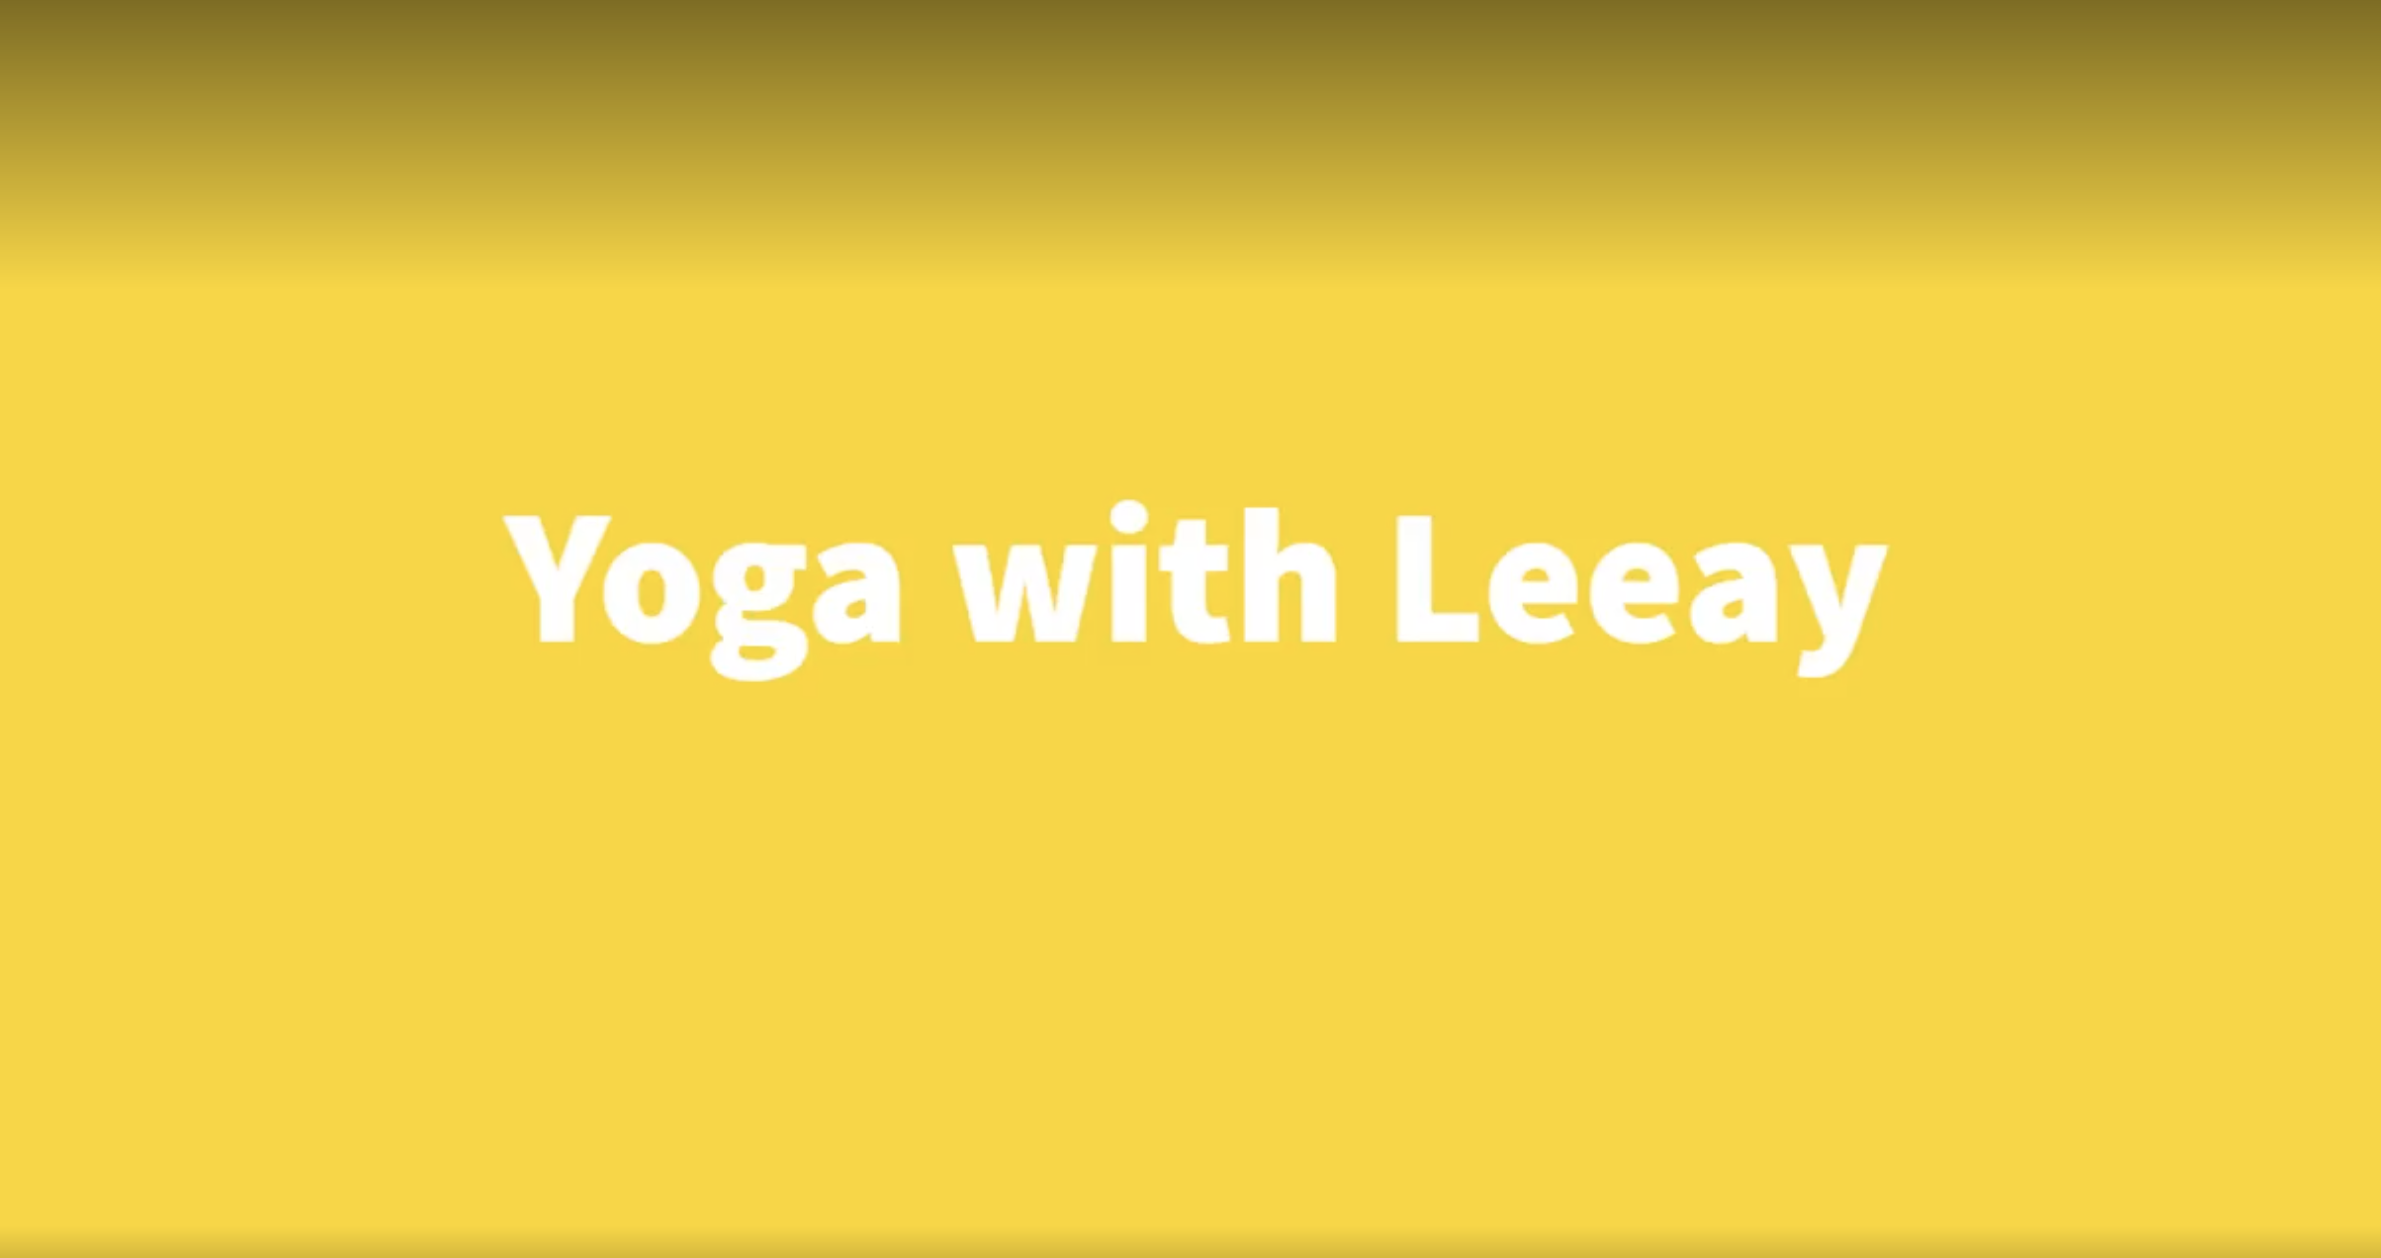 White Text reading "Yoga with Leeay" on a bright Yellow background